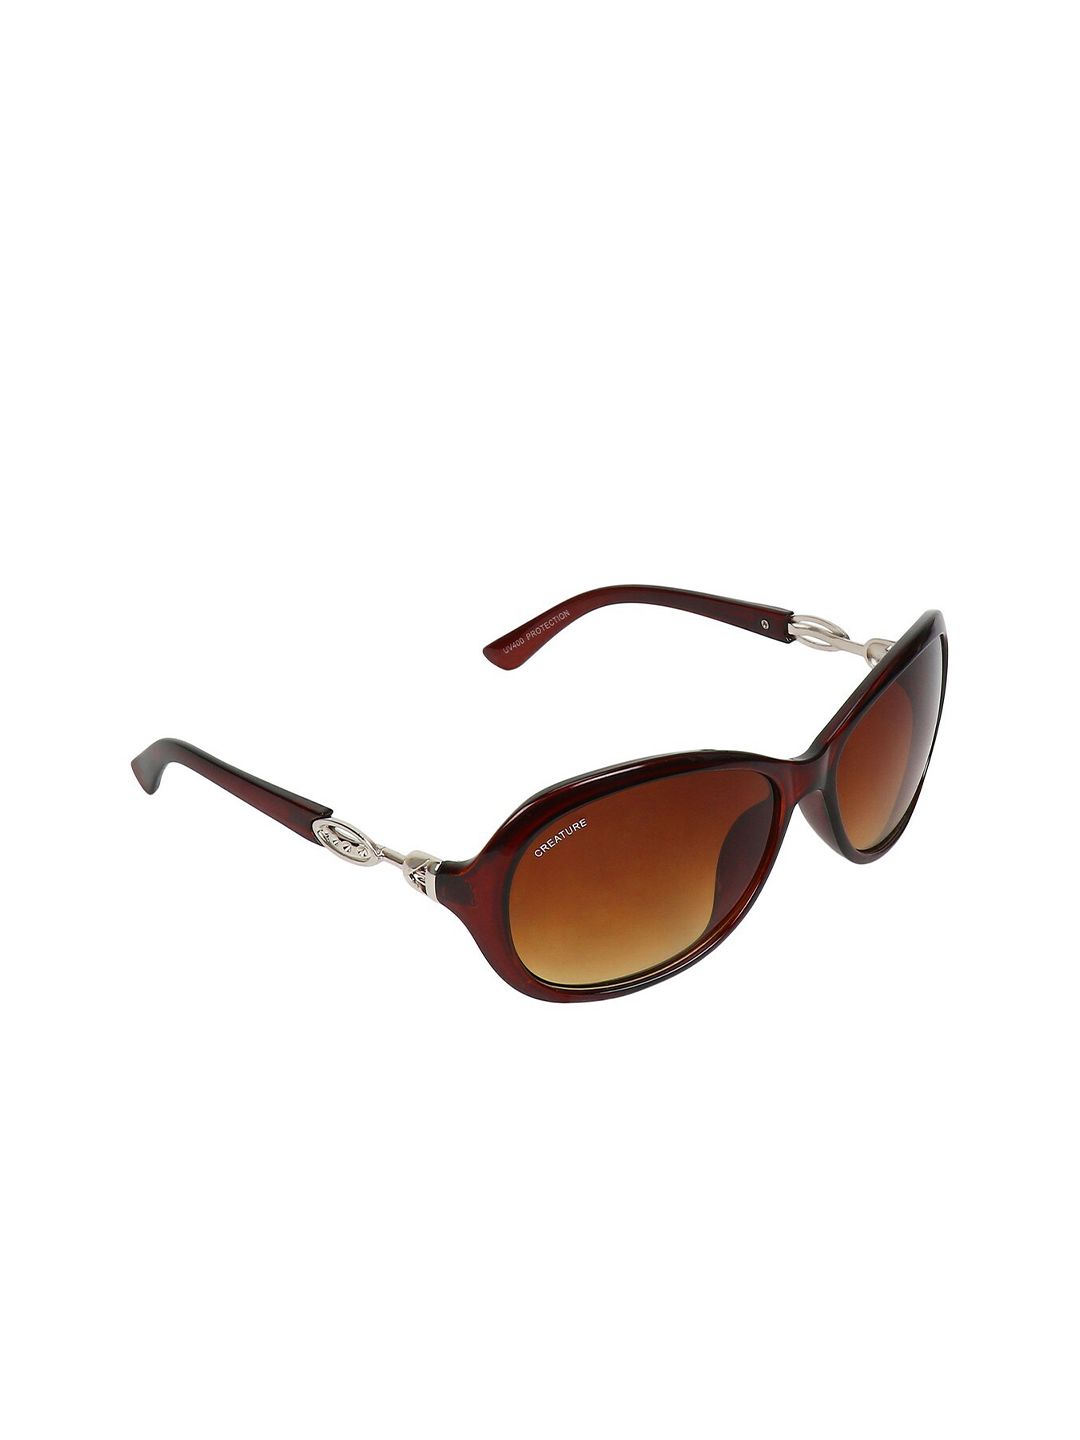 Creature Women Brown Lens & Brown Cateye Sunglasses with UV Protected Lens Price in India